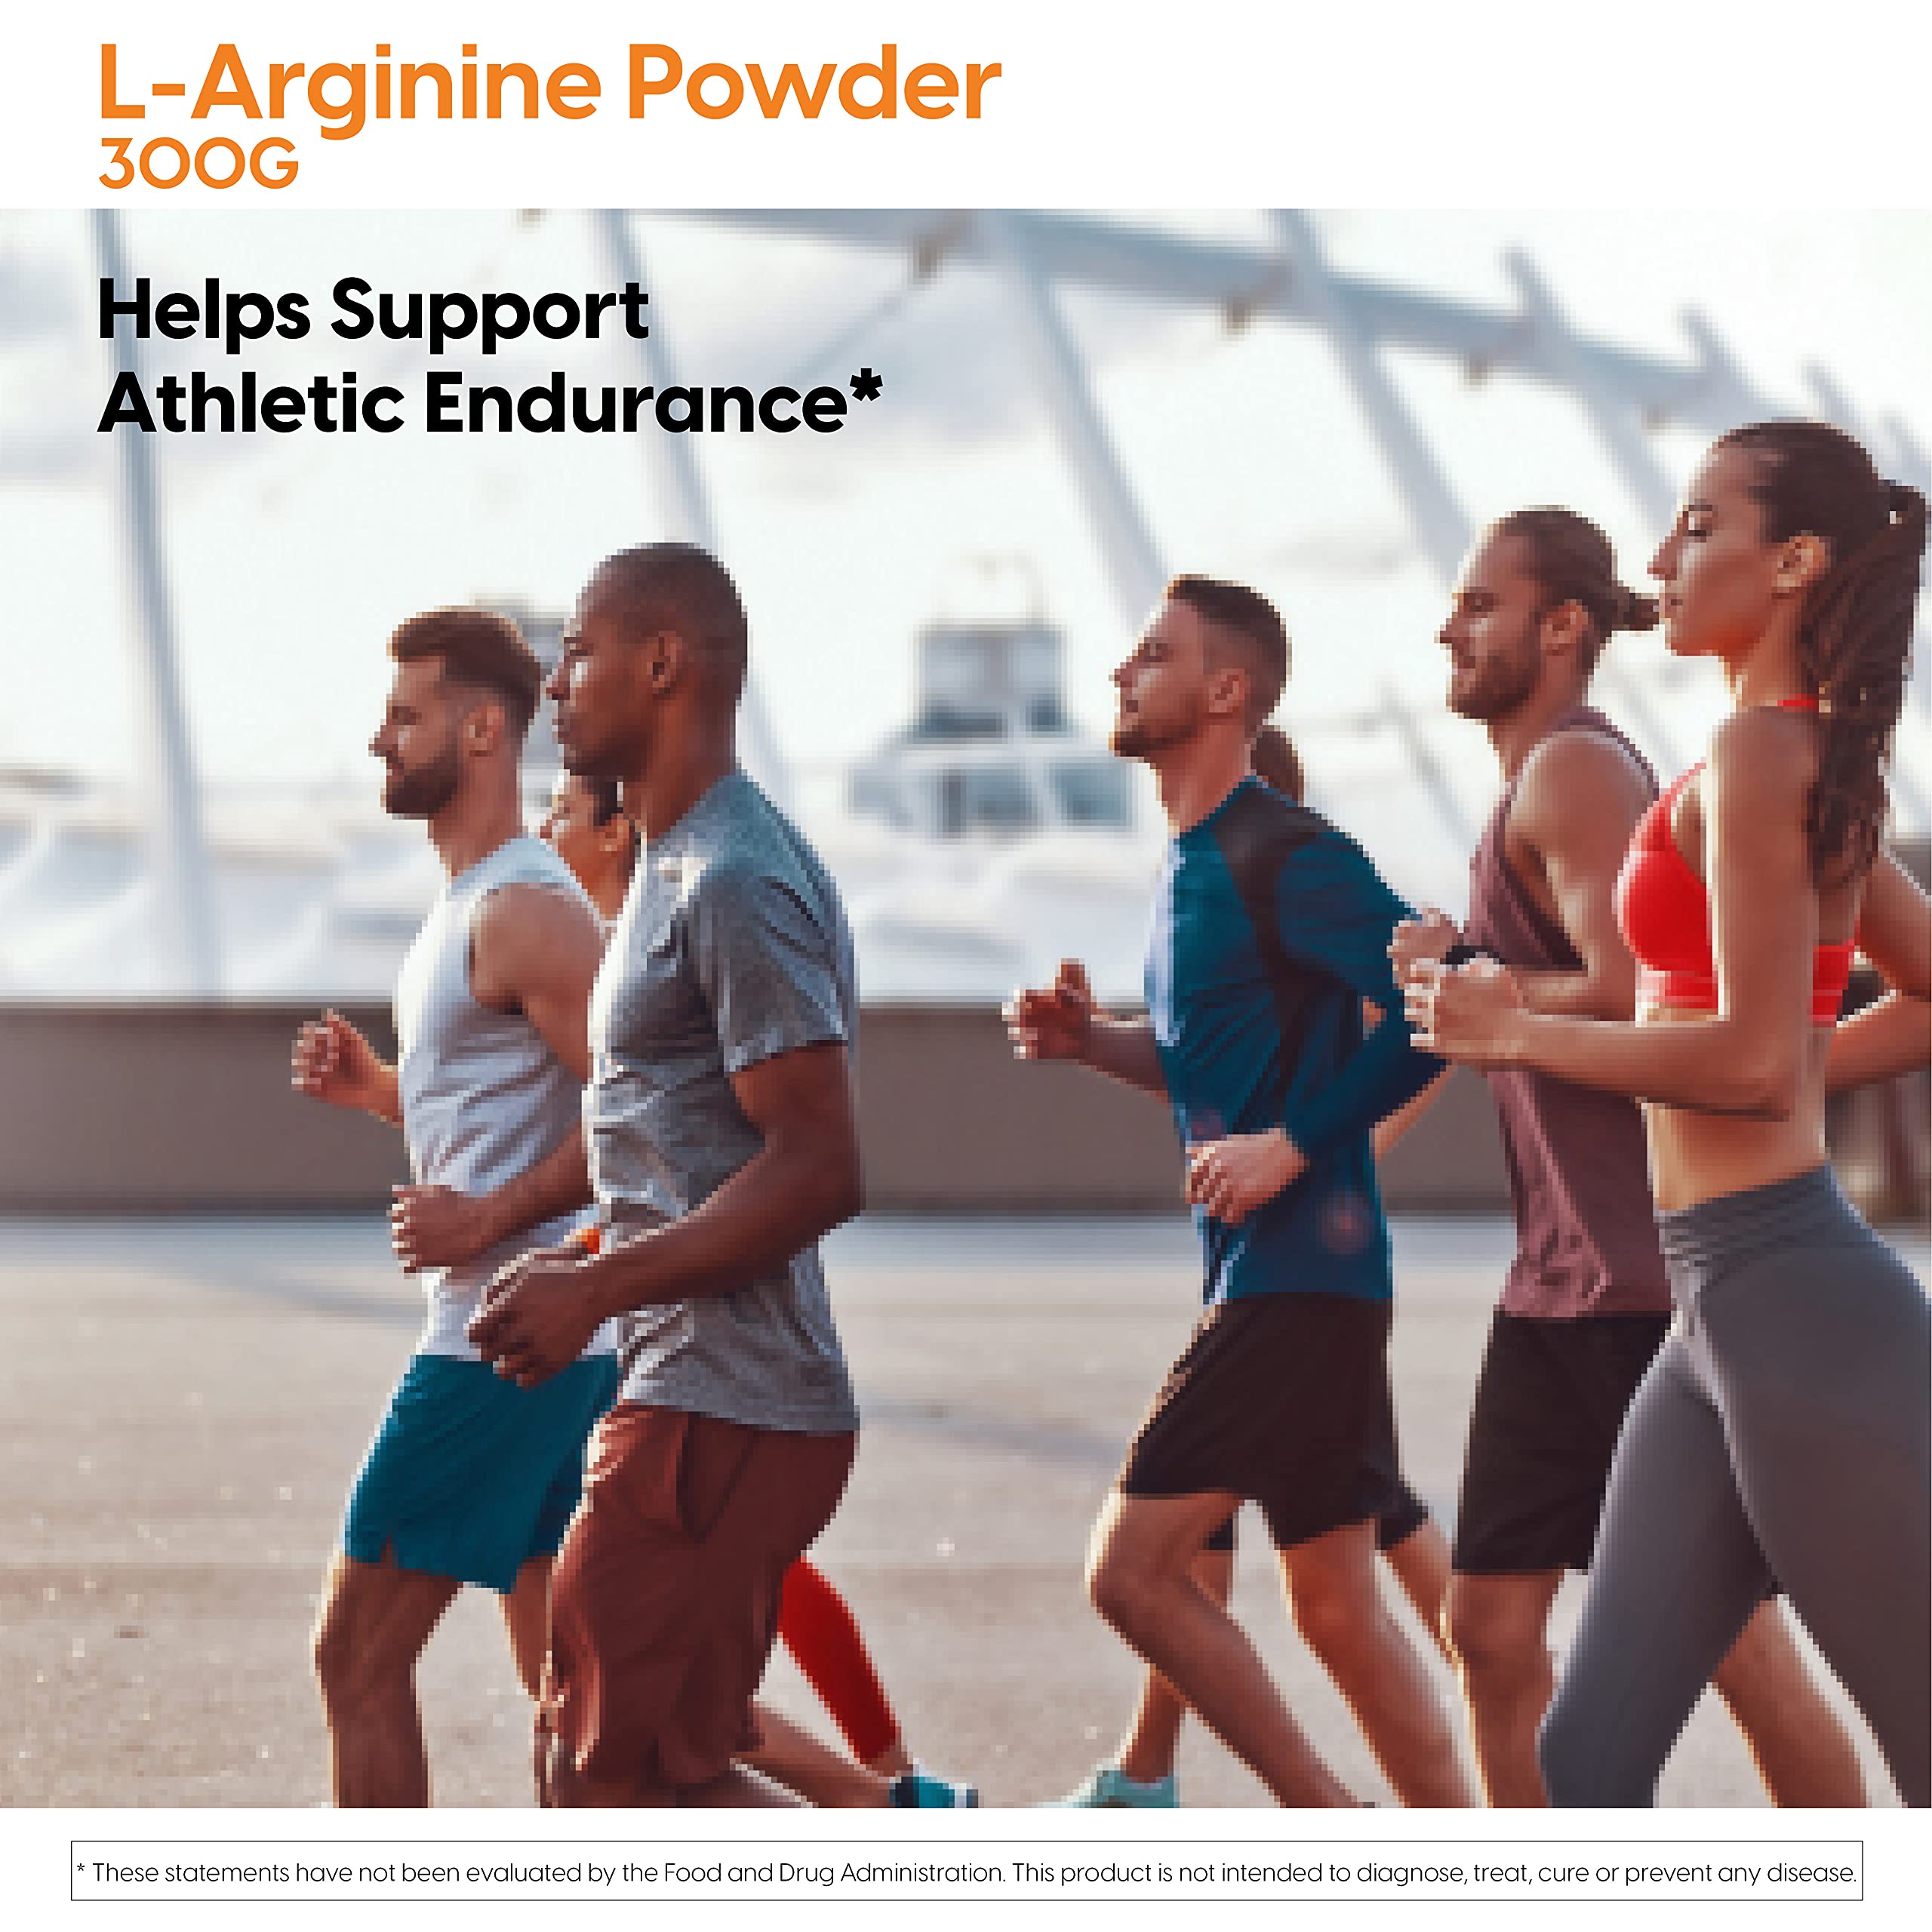 Doctor's Best L-arginine HCL Powder, Non-GMO, Vegan, Gluten Free, Soy Free, Helps Promote Muscle Growth, 300g